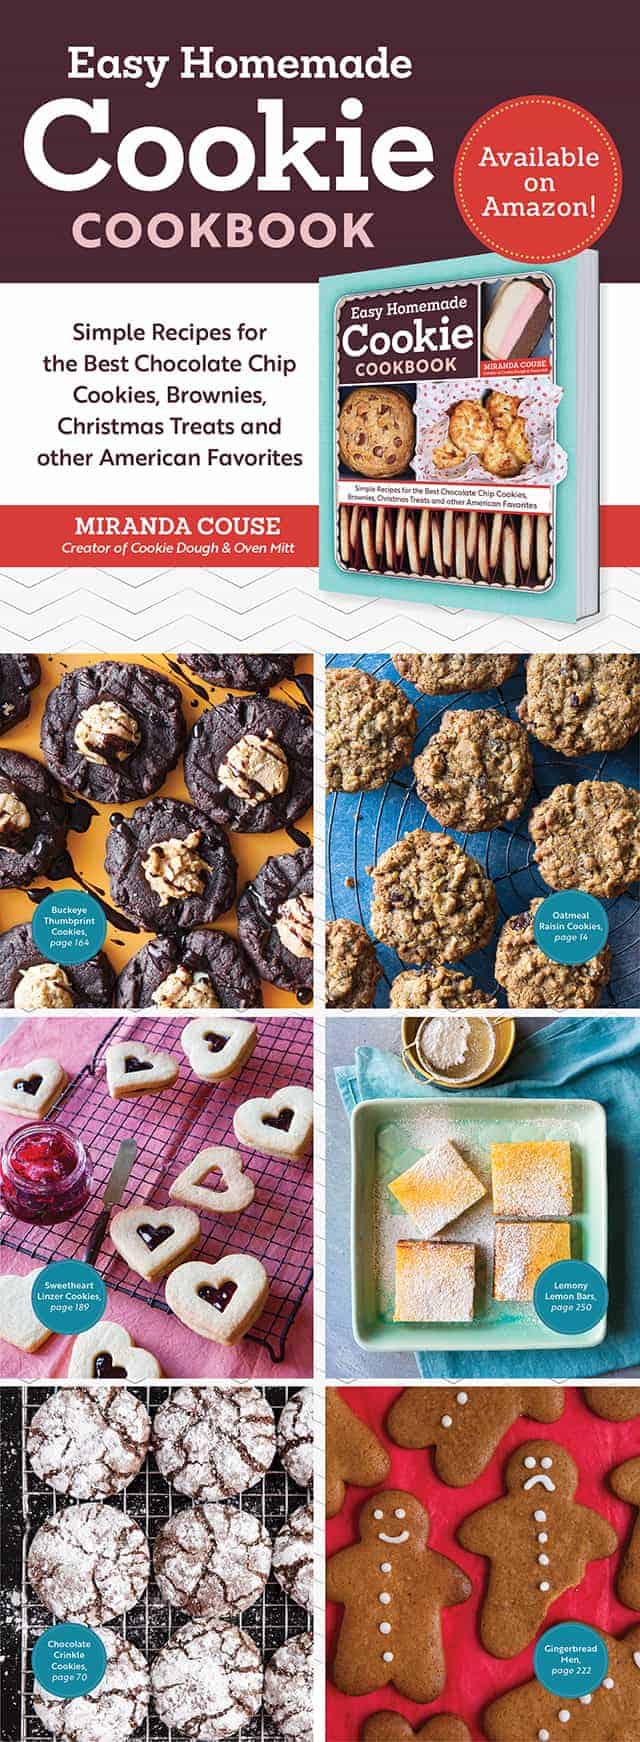 Miranda from Cookie Dough & Oven Mitt has a cookbook out! The Easy Homemade Cookie Cookbook can be ordered now! There are 160 recipes, techniques on decorating cookies, tips and tricks for each recipe, and they're all simple to make!